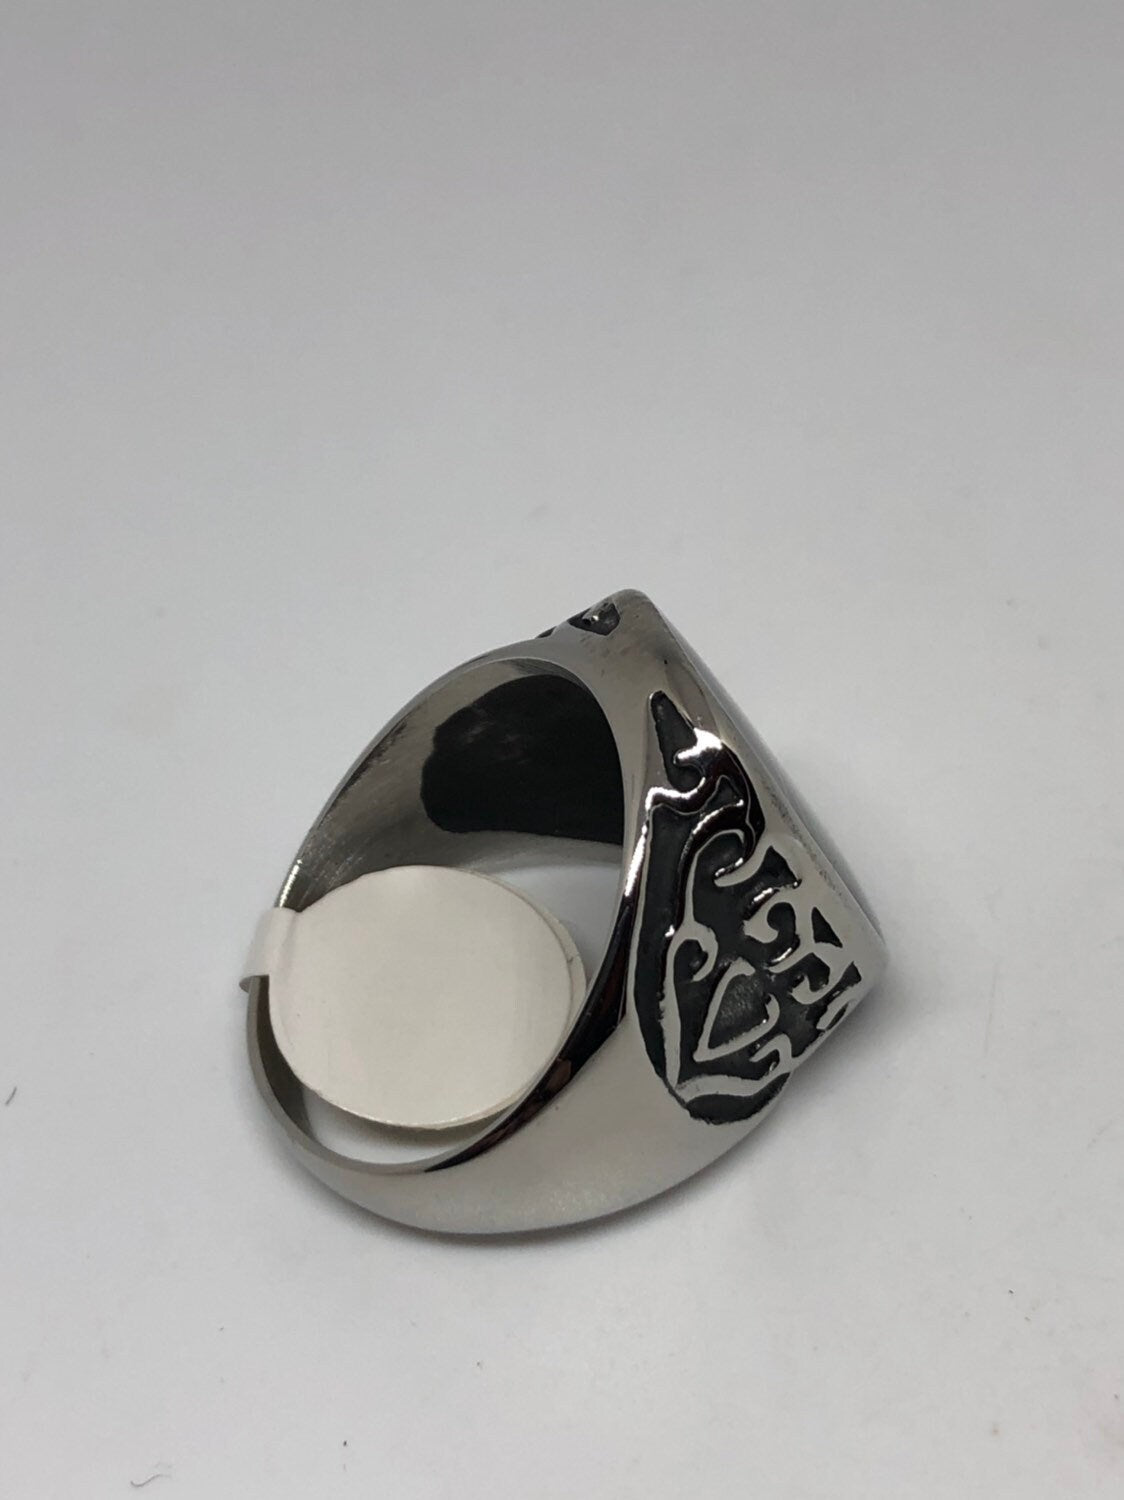 Vintage Stainless Steel Gothic Cross Mens Ring